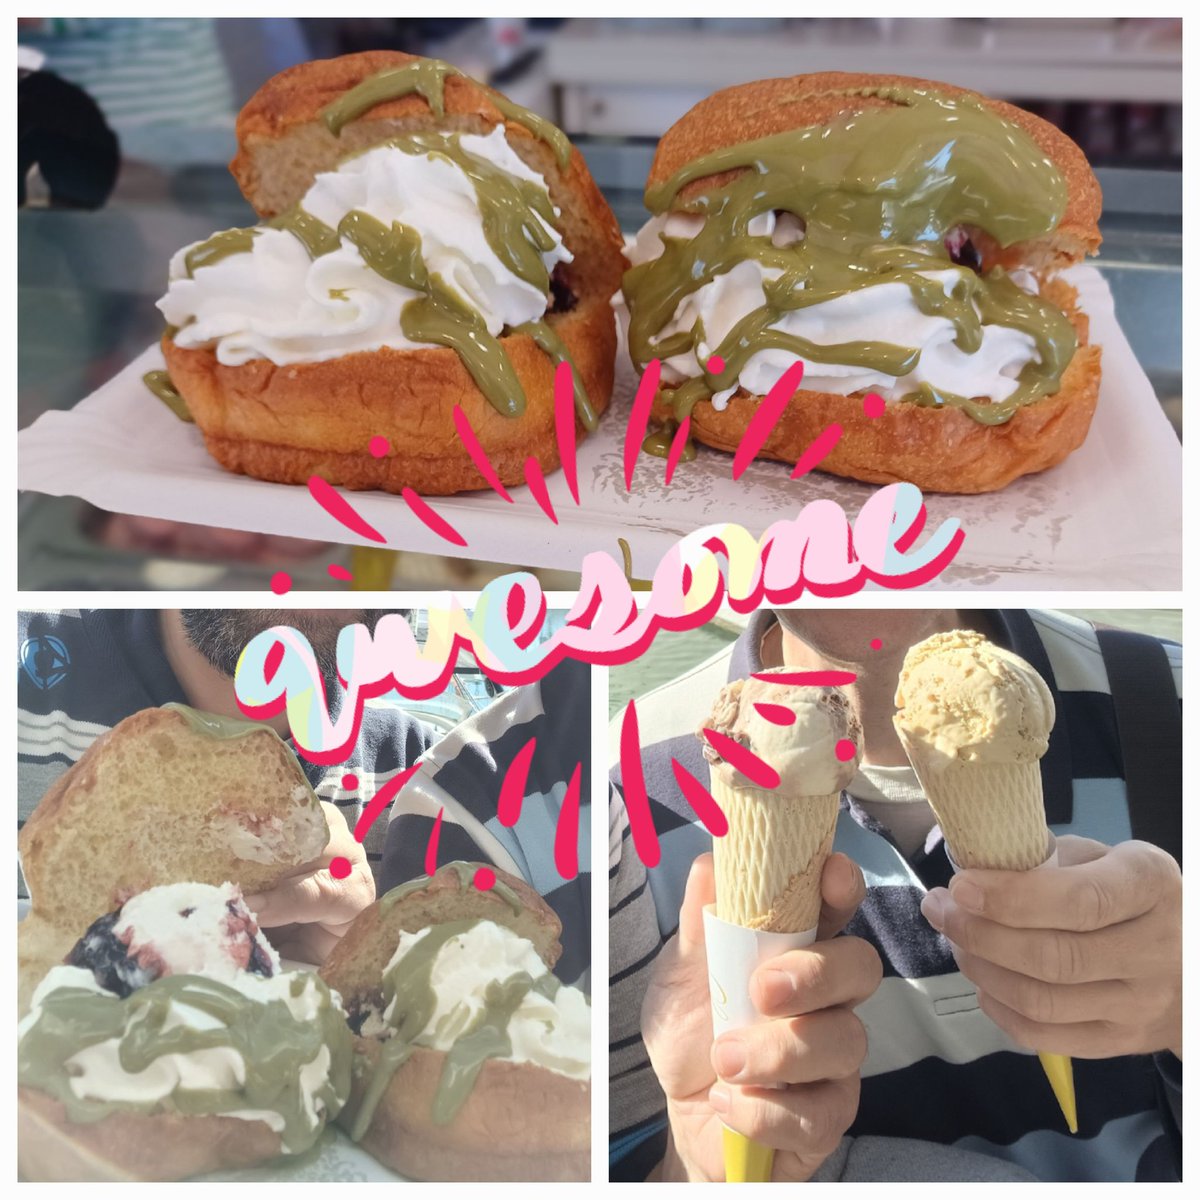 While everybody eats #ChocolateConChurros on Jan 1st, our personal tradition is to celebrate this #LoveMalaga #bestclimaineurope with #IceCream at the sunny beach. Cherry Ice cream with pistachio sauce on a hot brioche, plus Malaga ice cream (rum & raisins) and #Baileys cones.